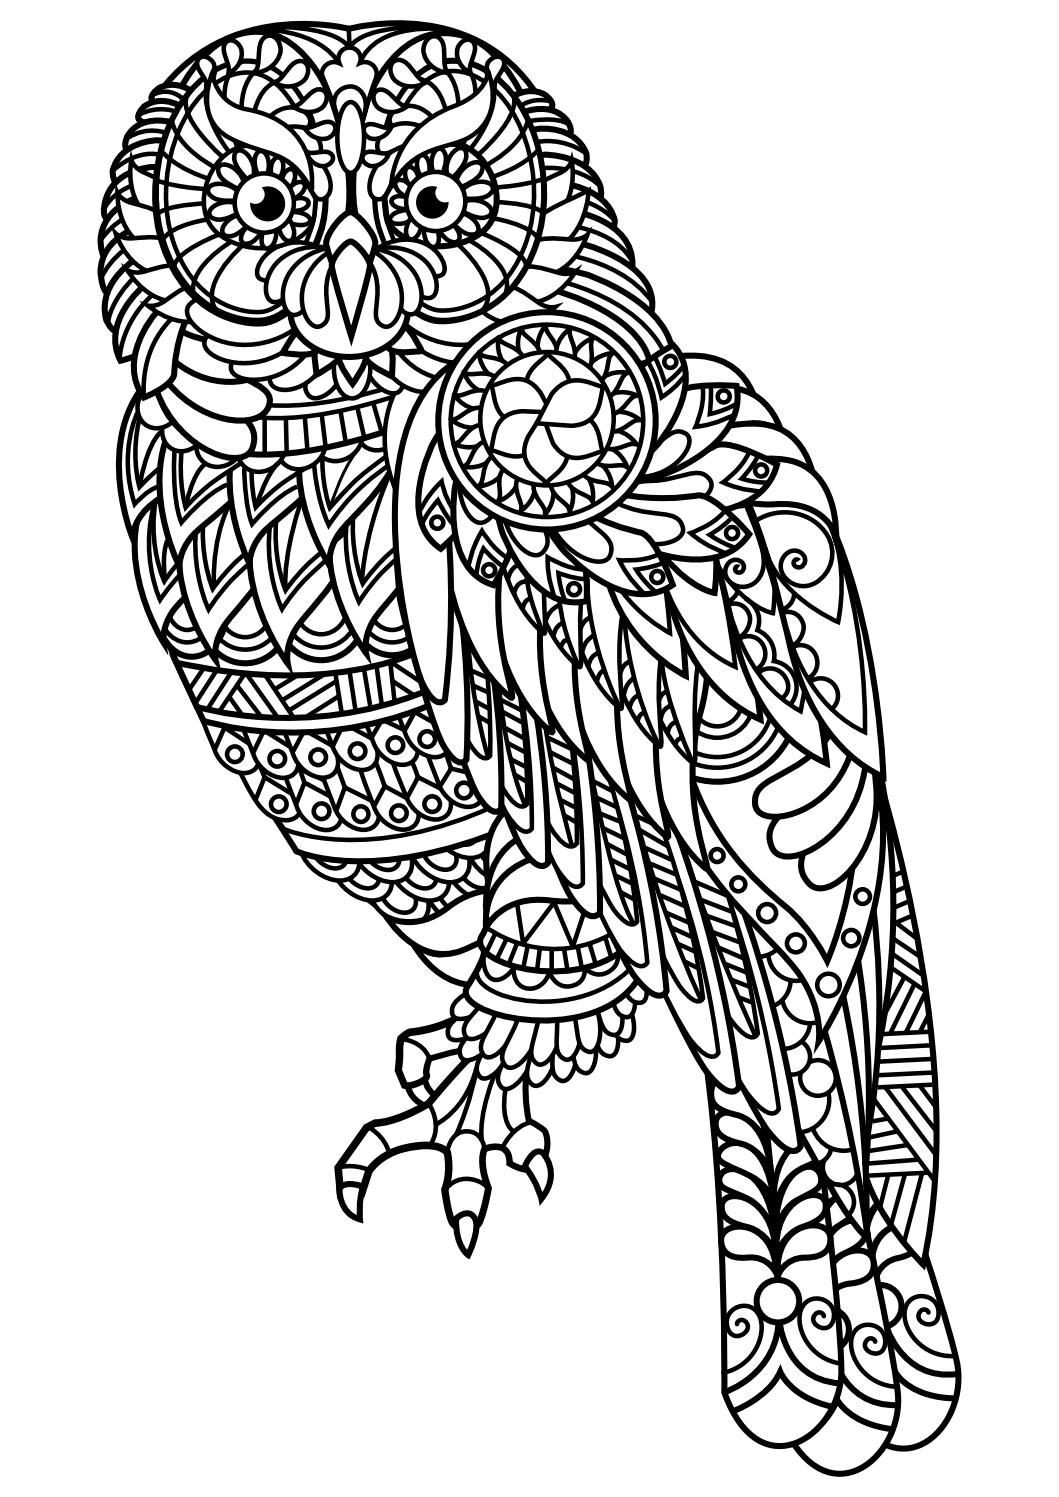 Adult Coloring Pages Animal Patterns
 Animal coloring pages pdf